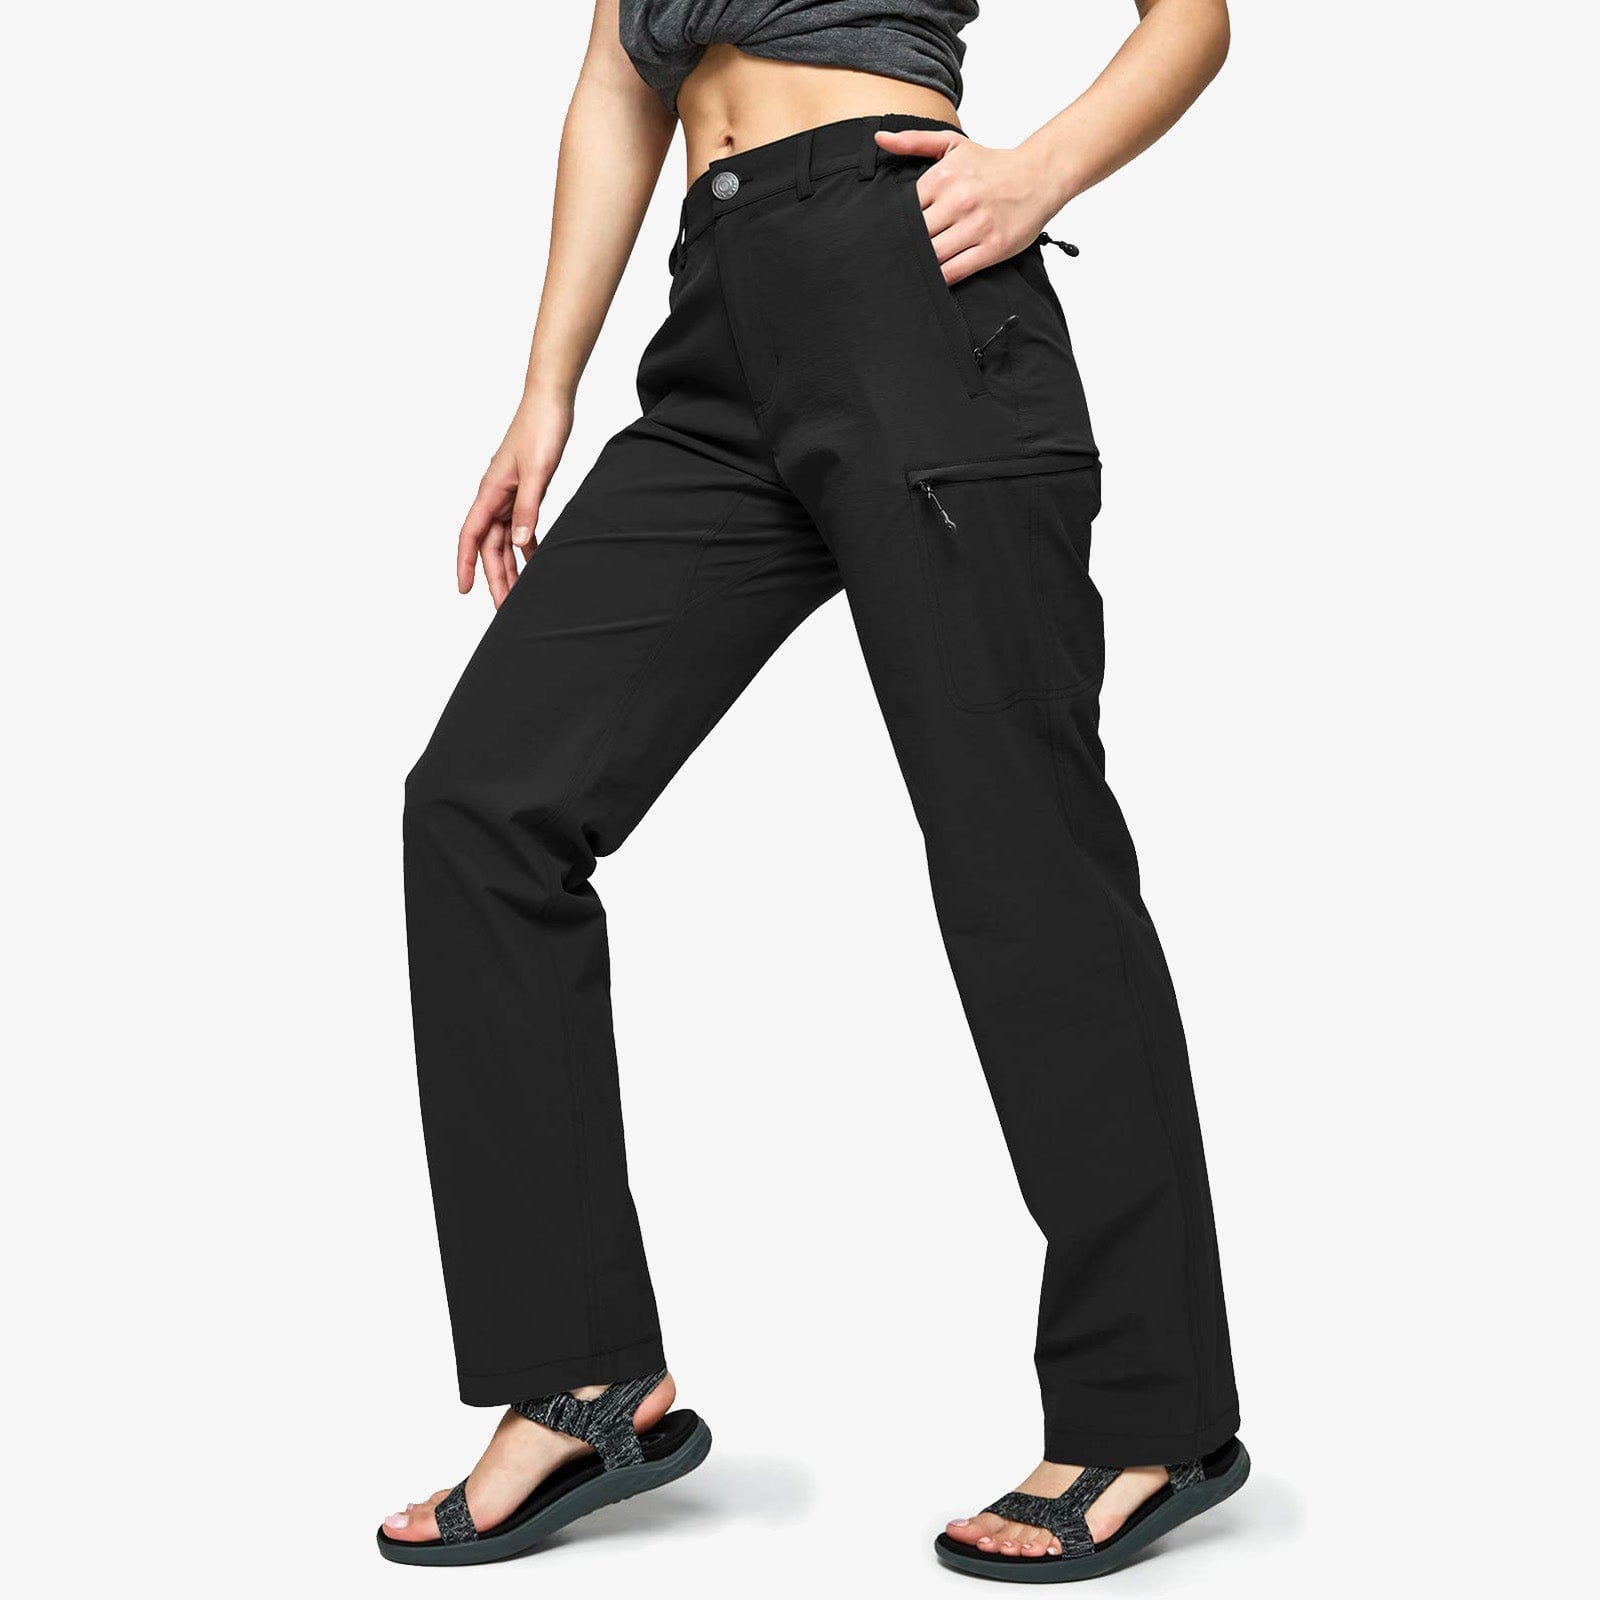 Tactical Pants for Women